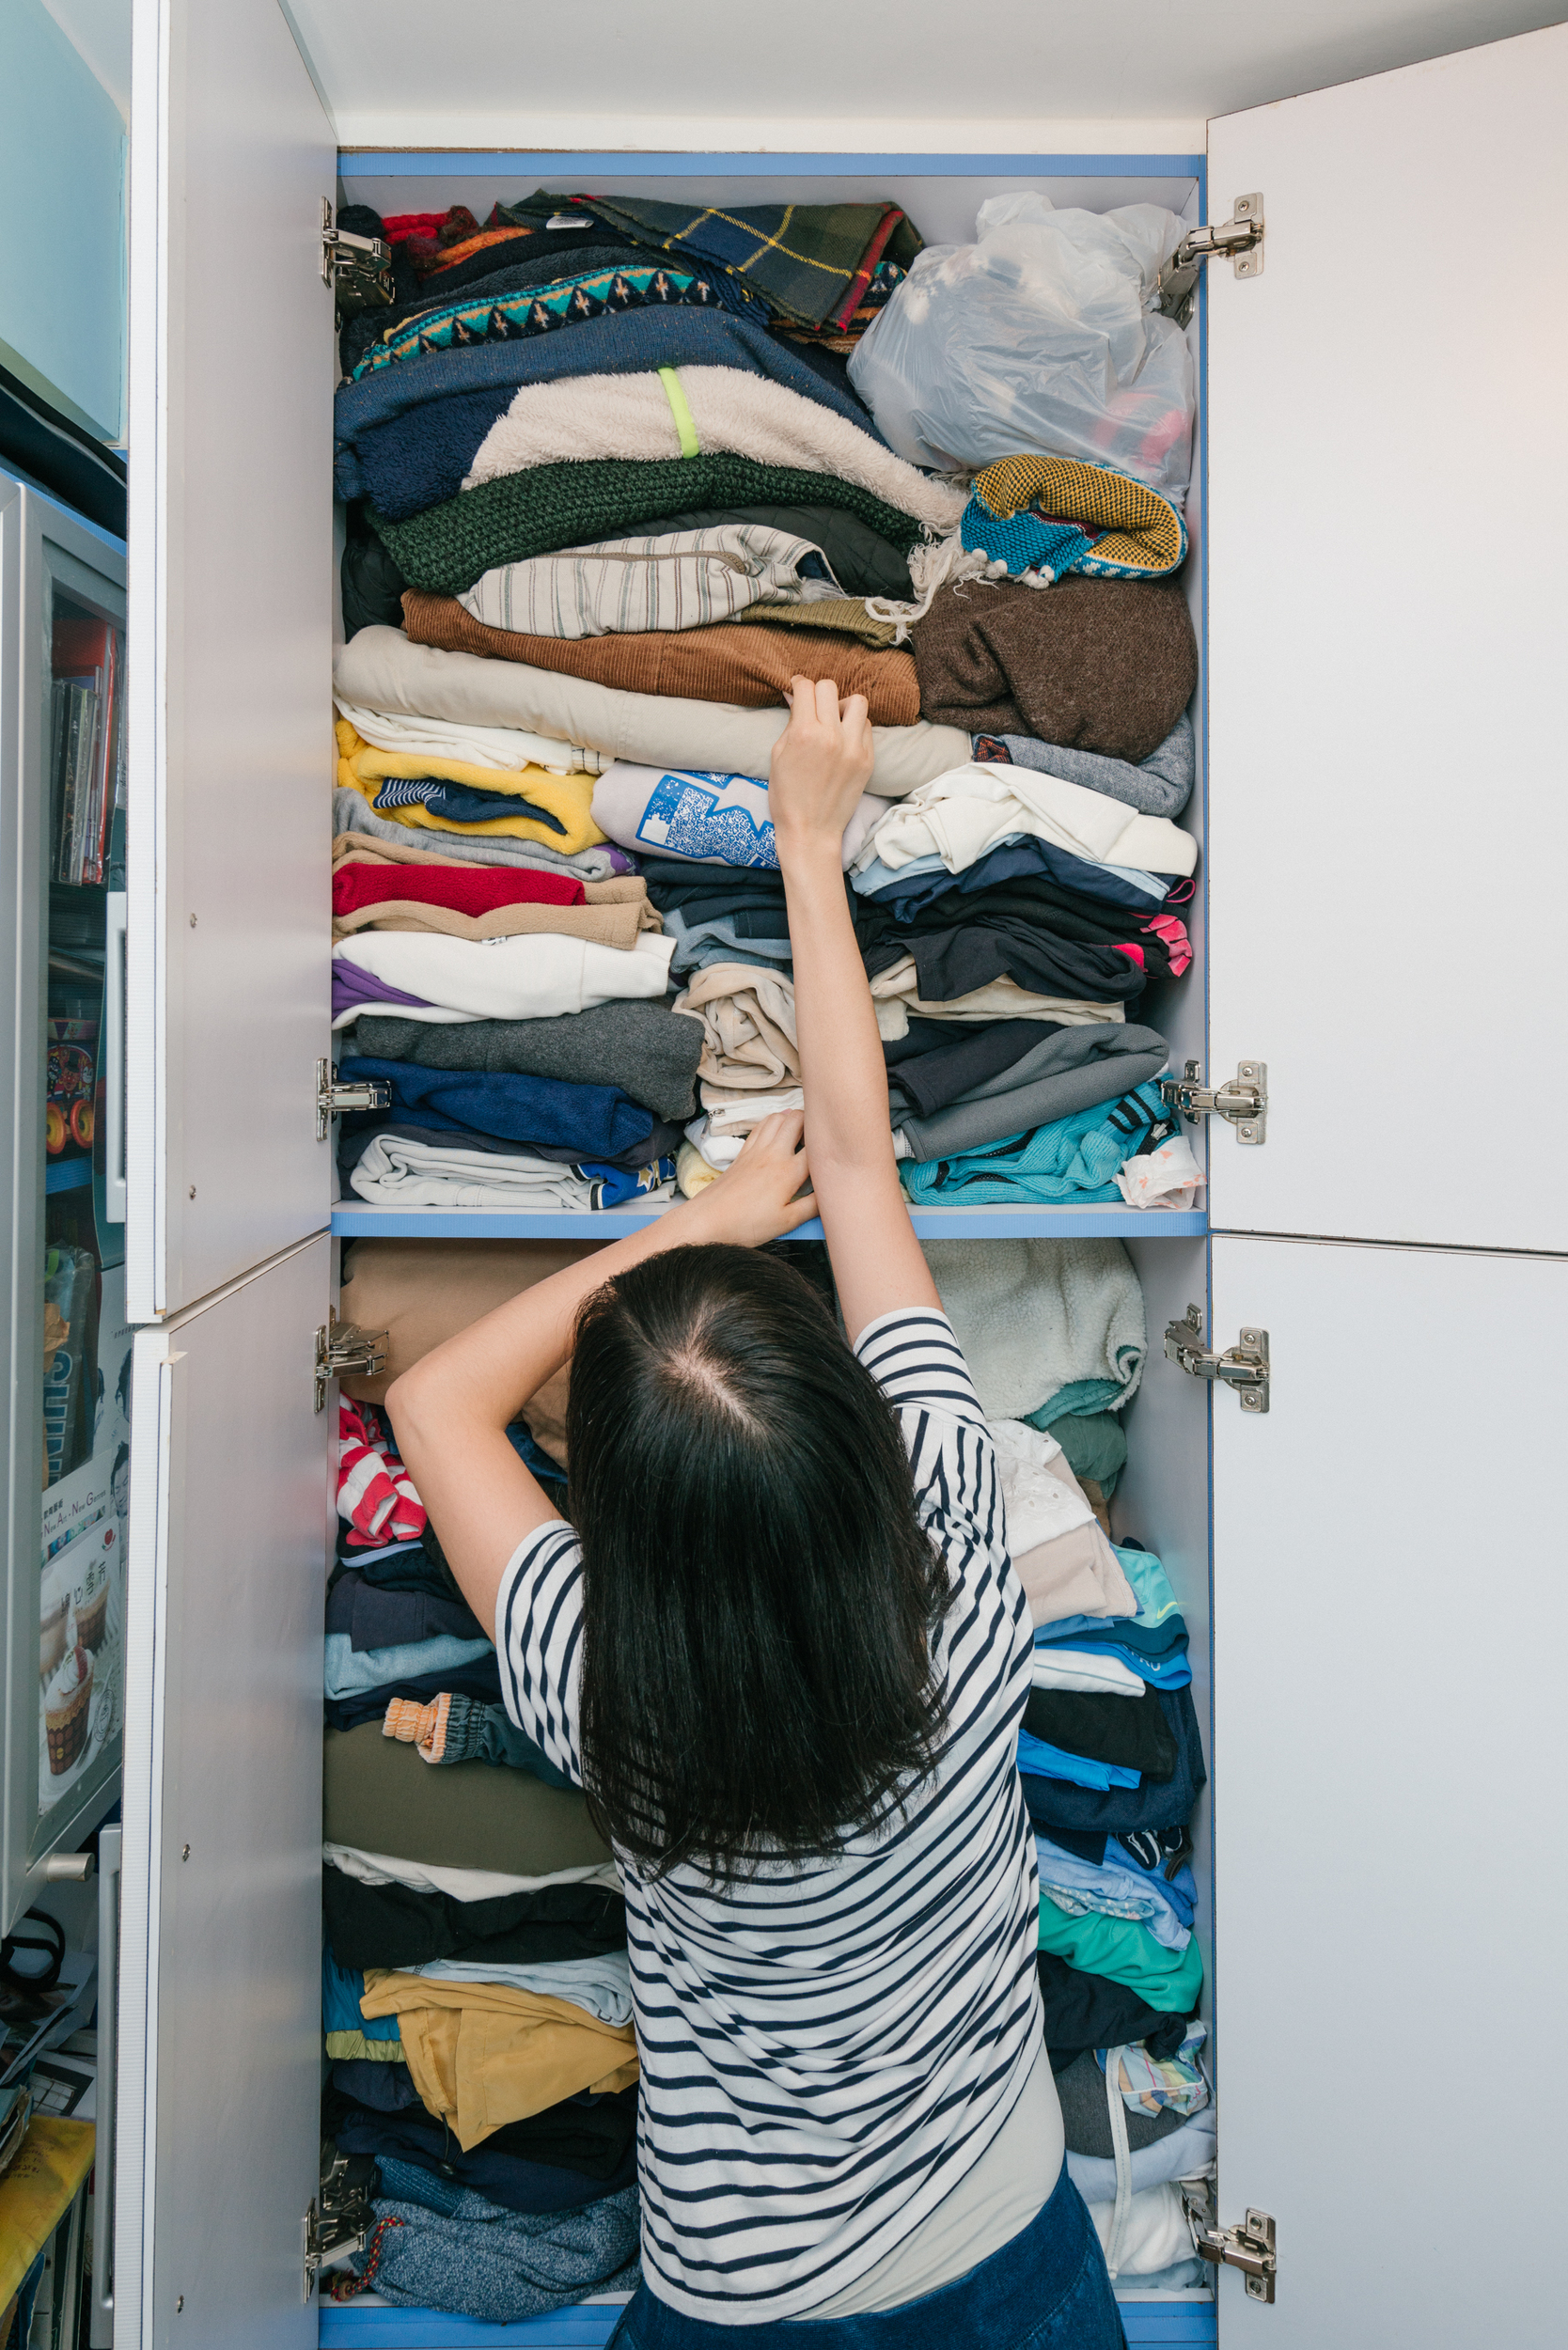 A woman reaches high into her open wardrobe crammed with clothes